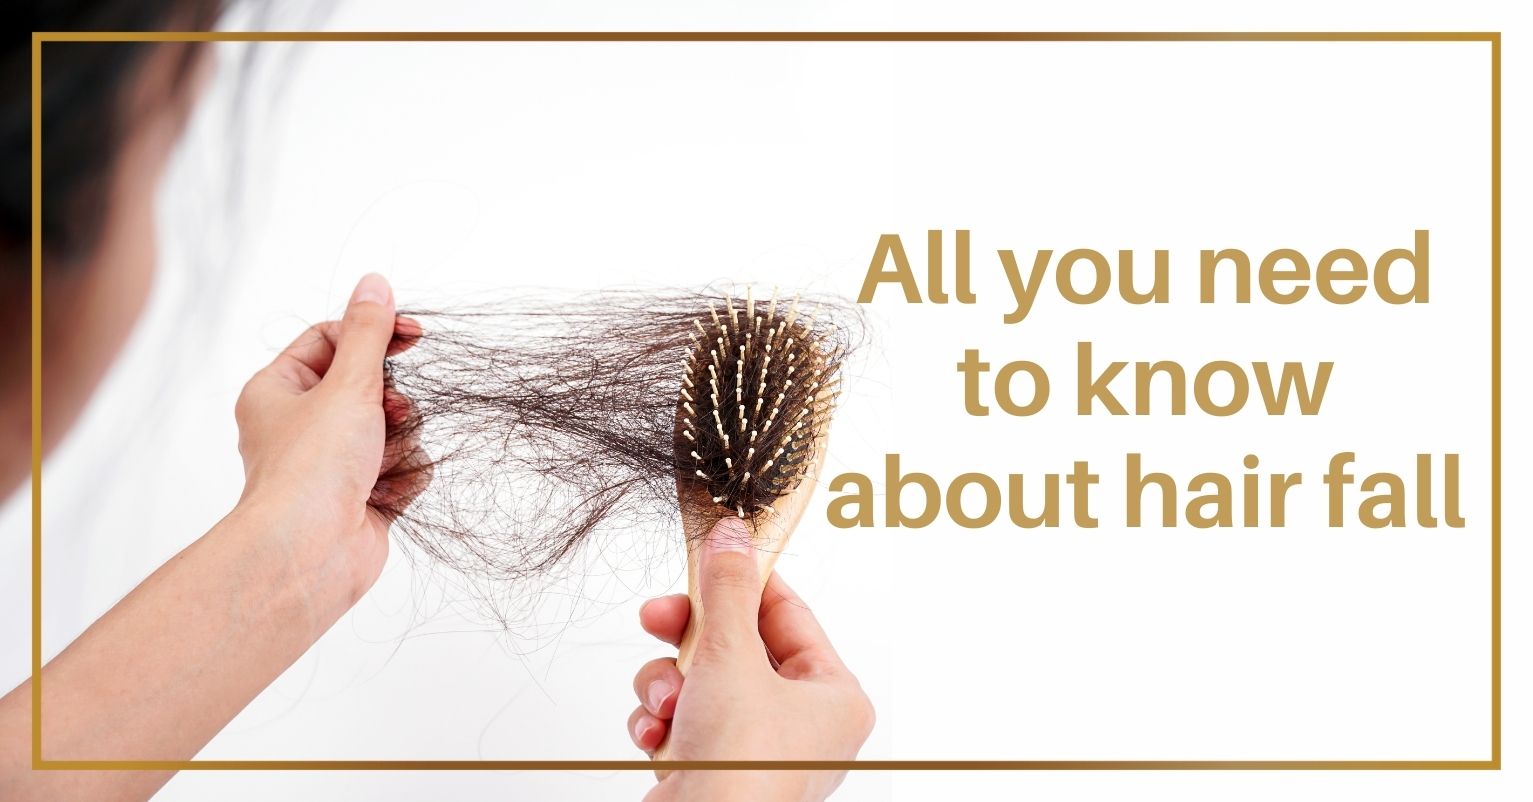 All you need to know about hair fall